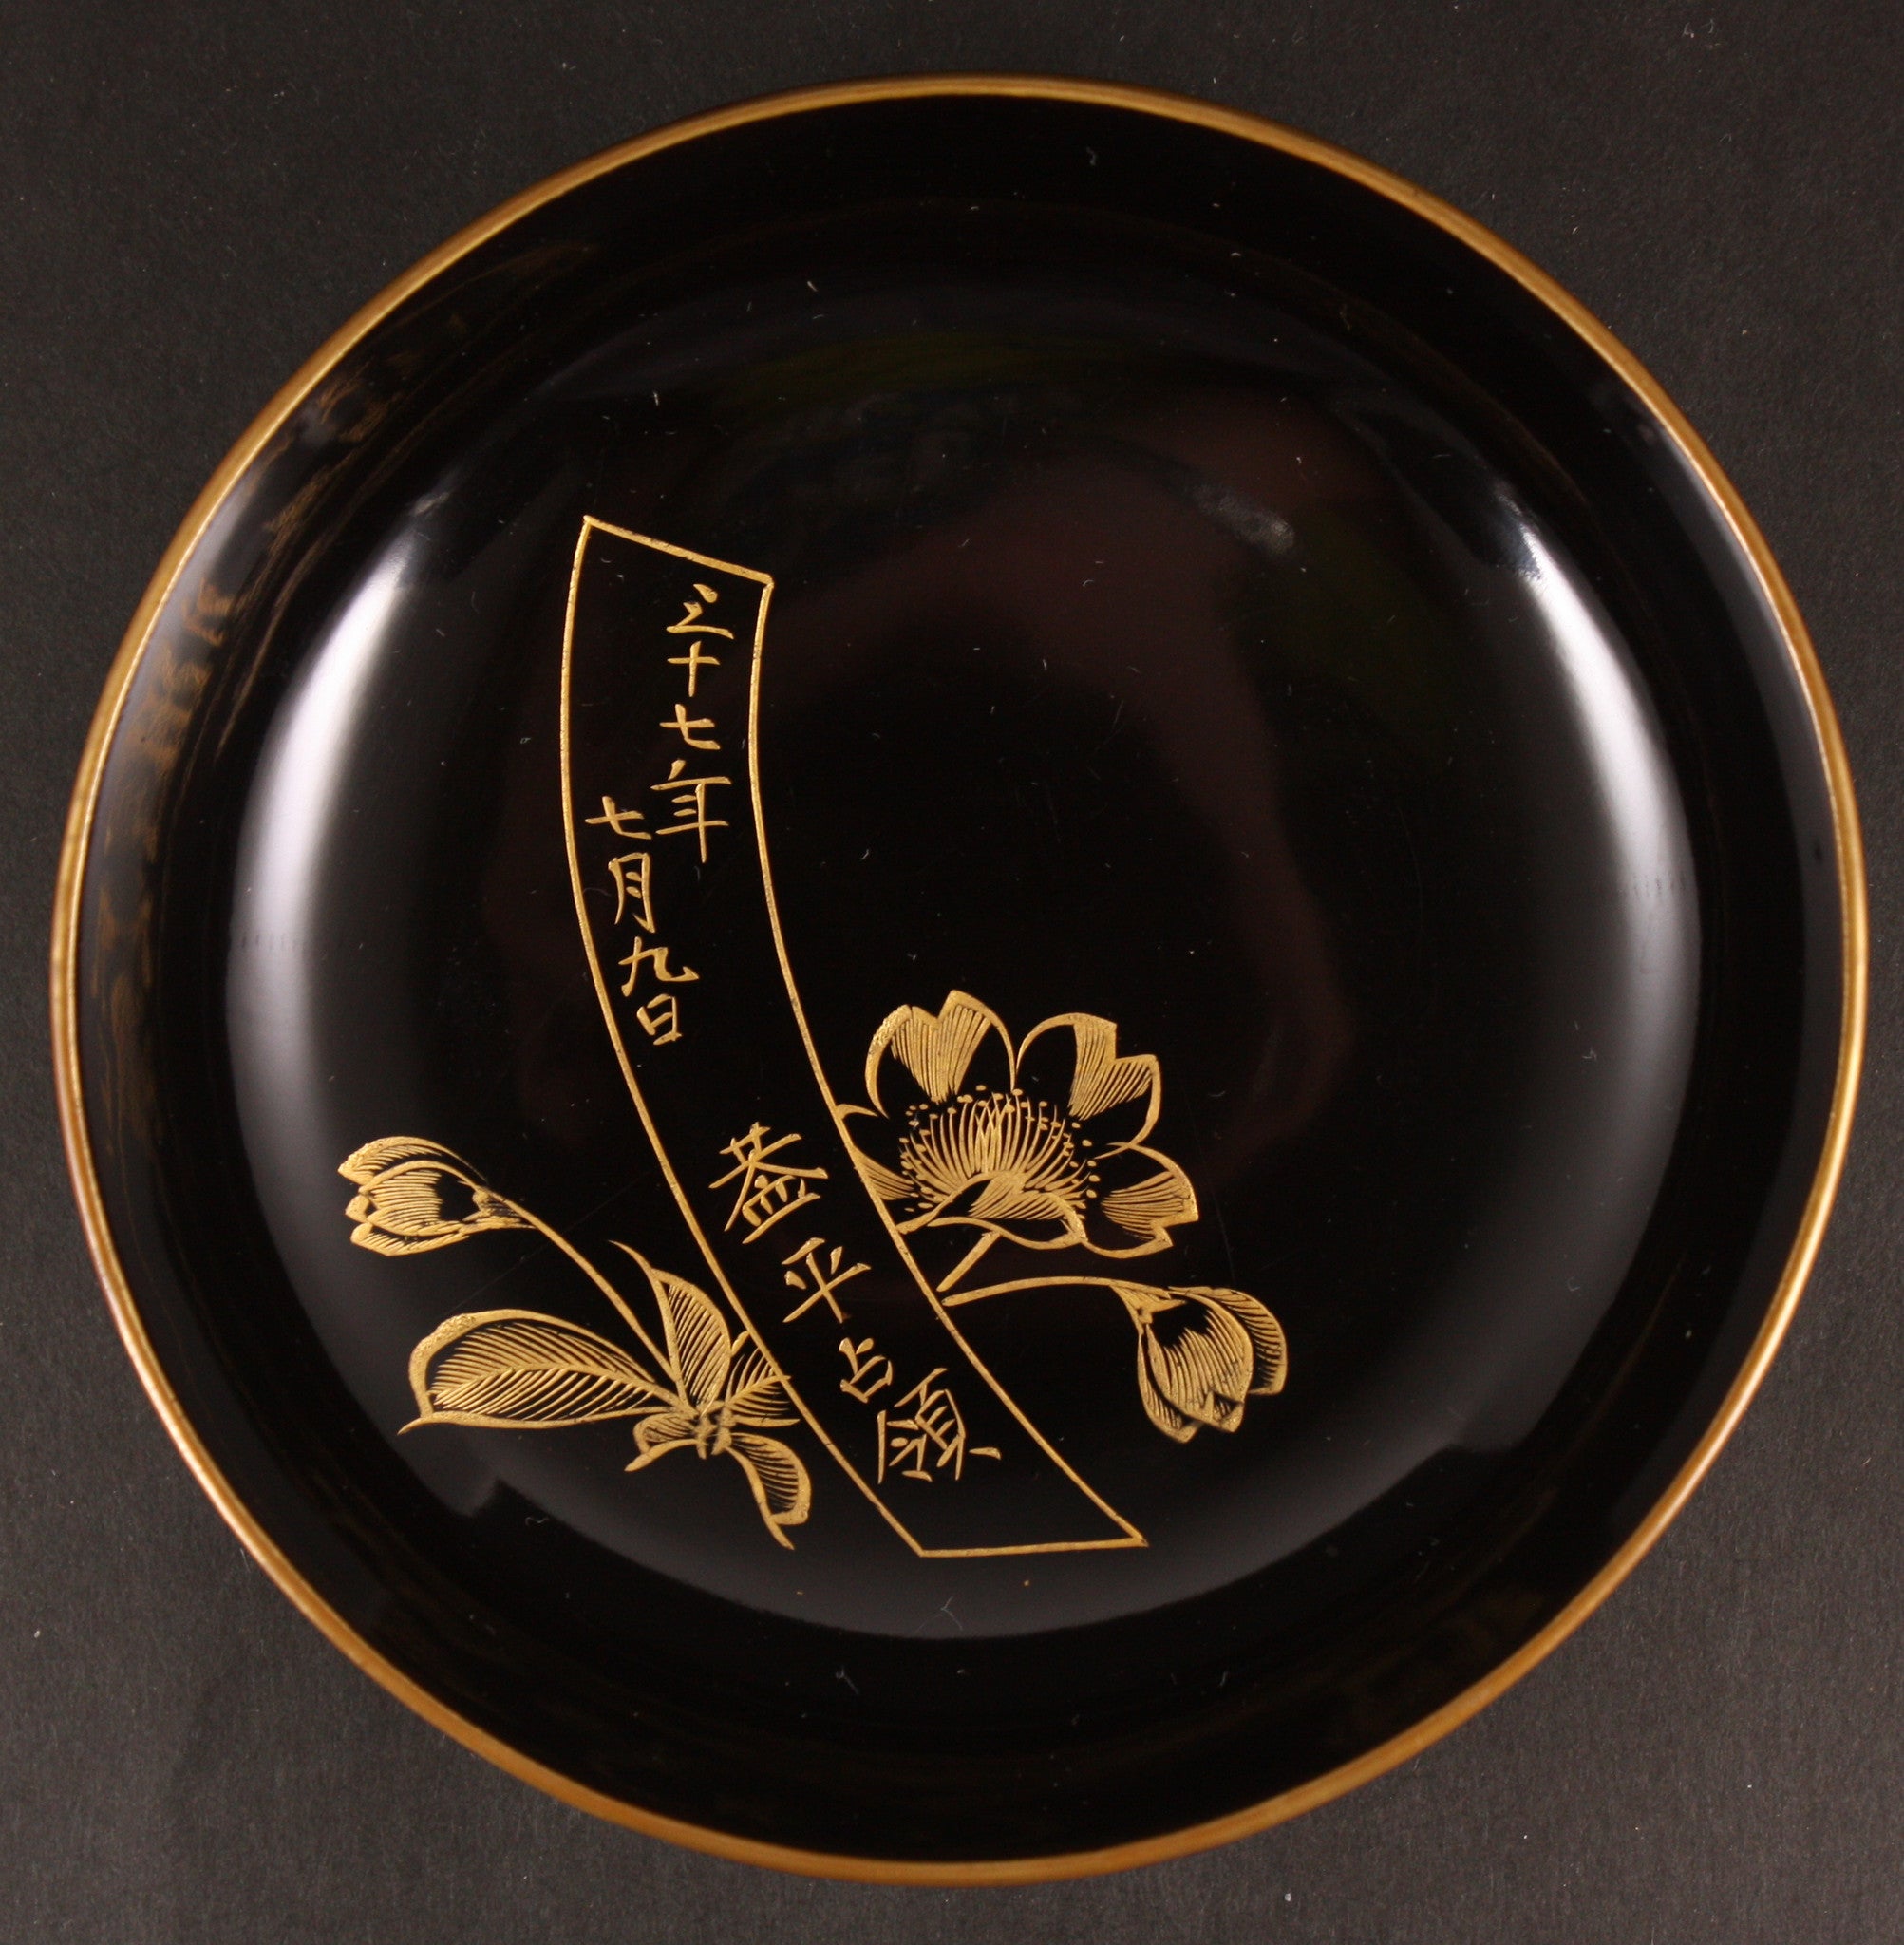 Beautiful Makie Lacquer Set of Five Russo Japanese War Land Battles Commemoration Dishes